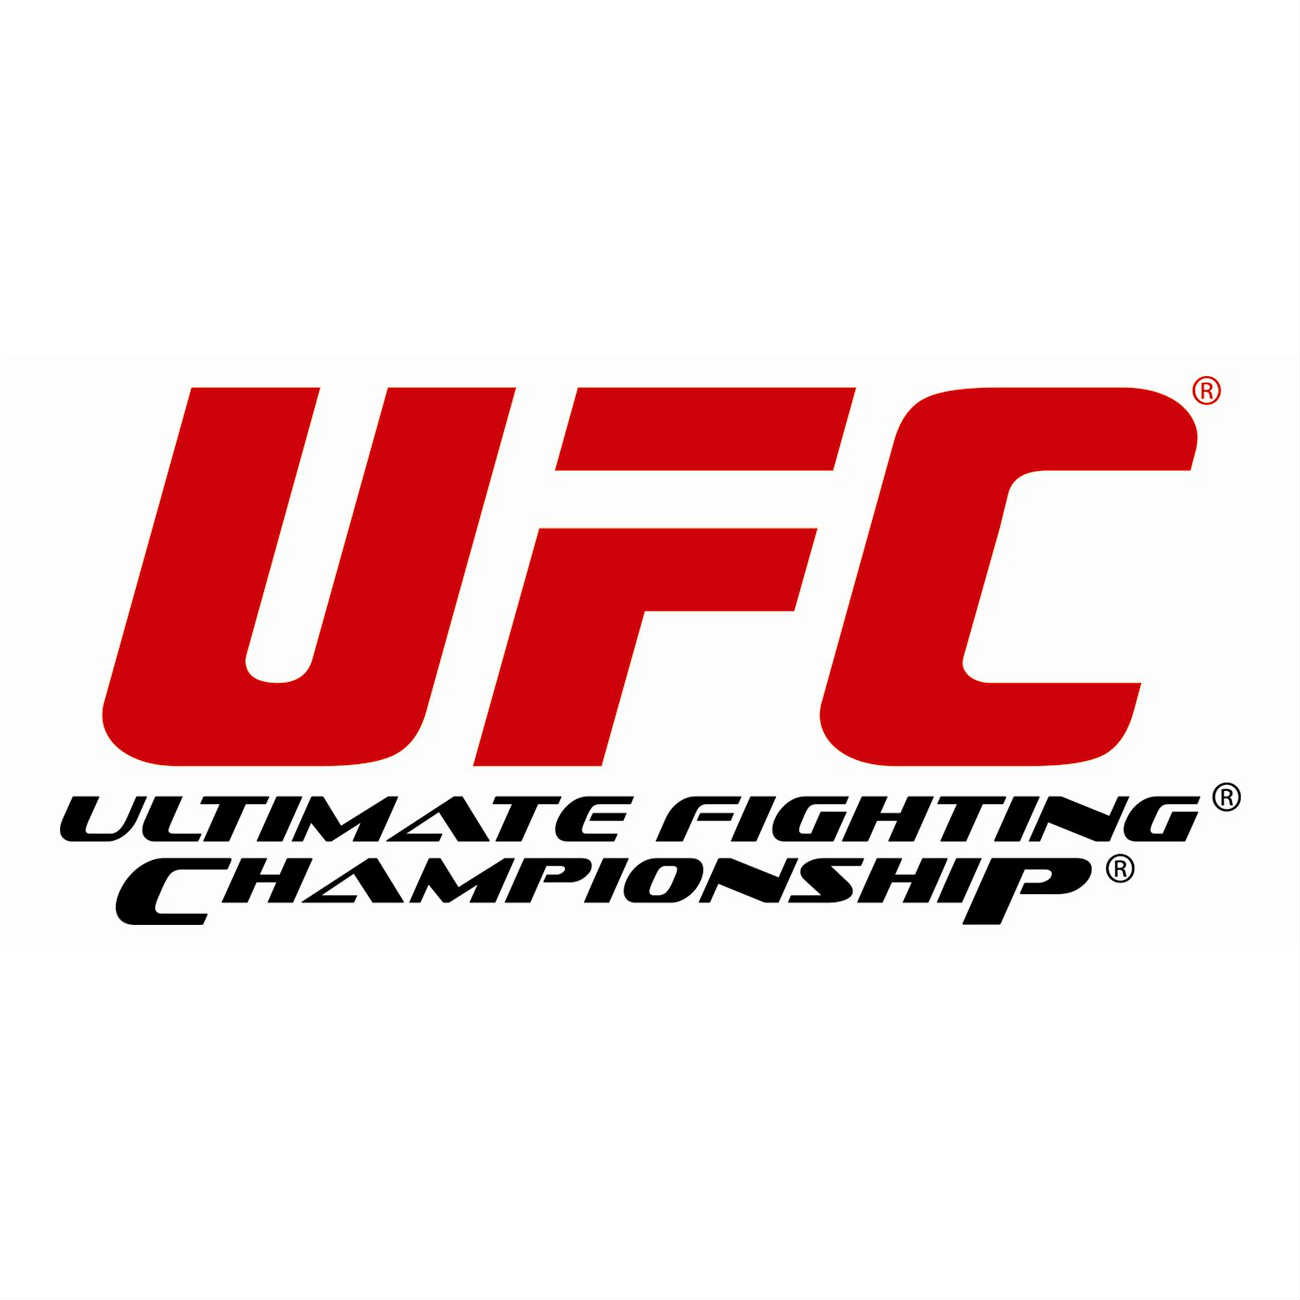 Where to watch the UFC fights in Phuket